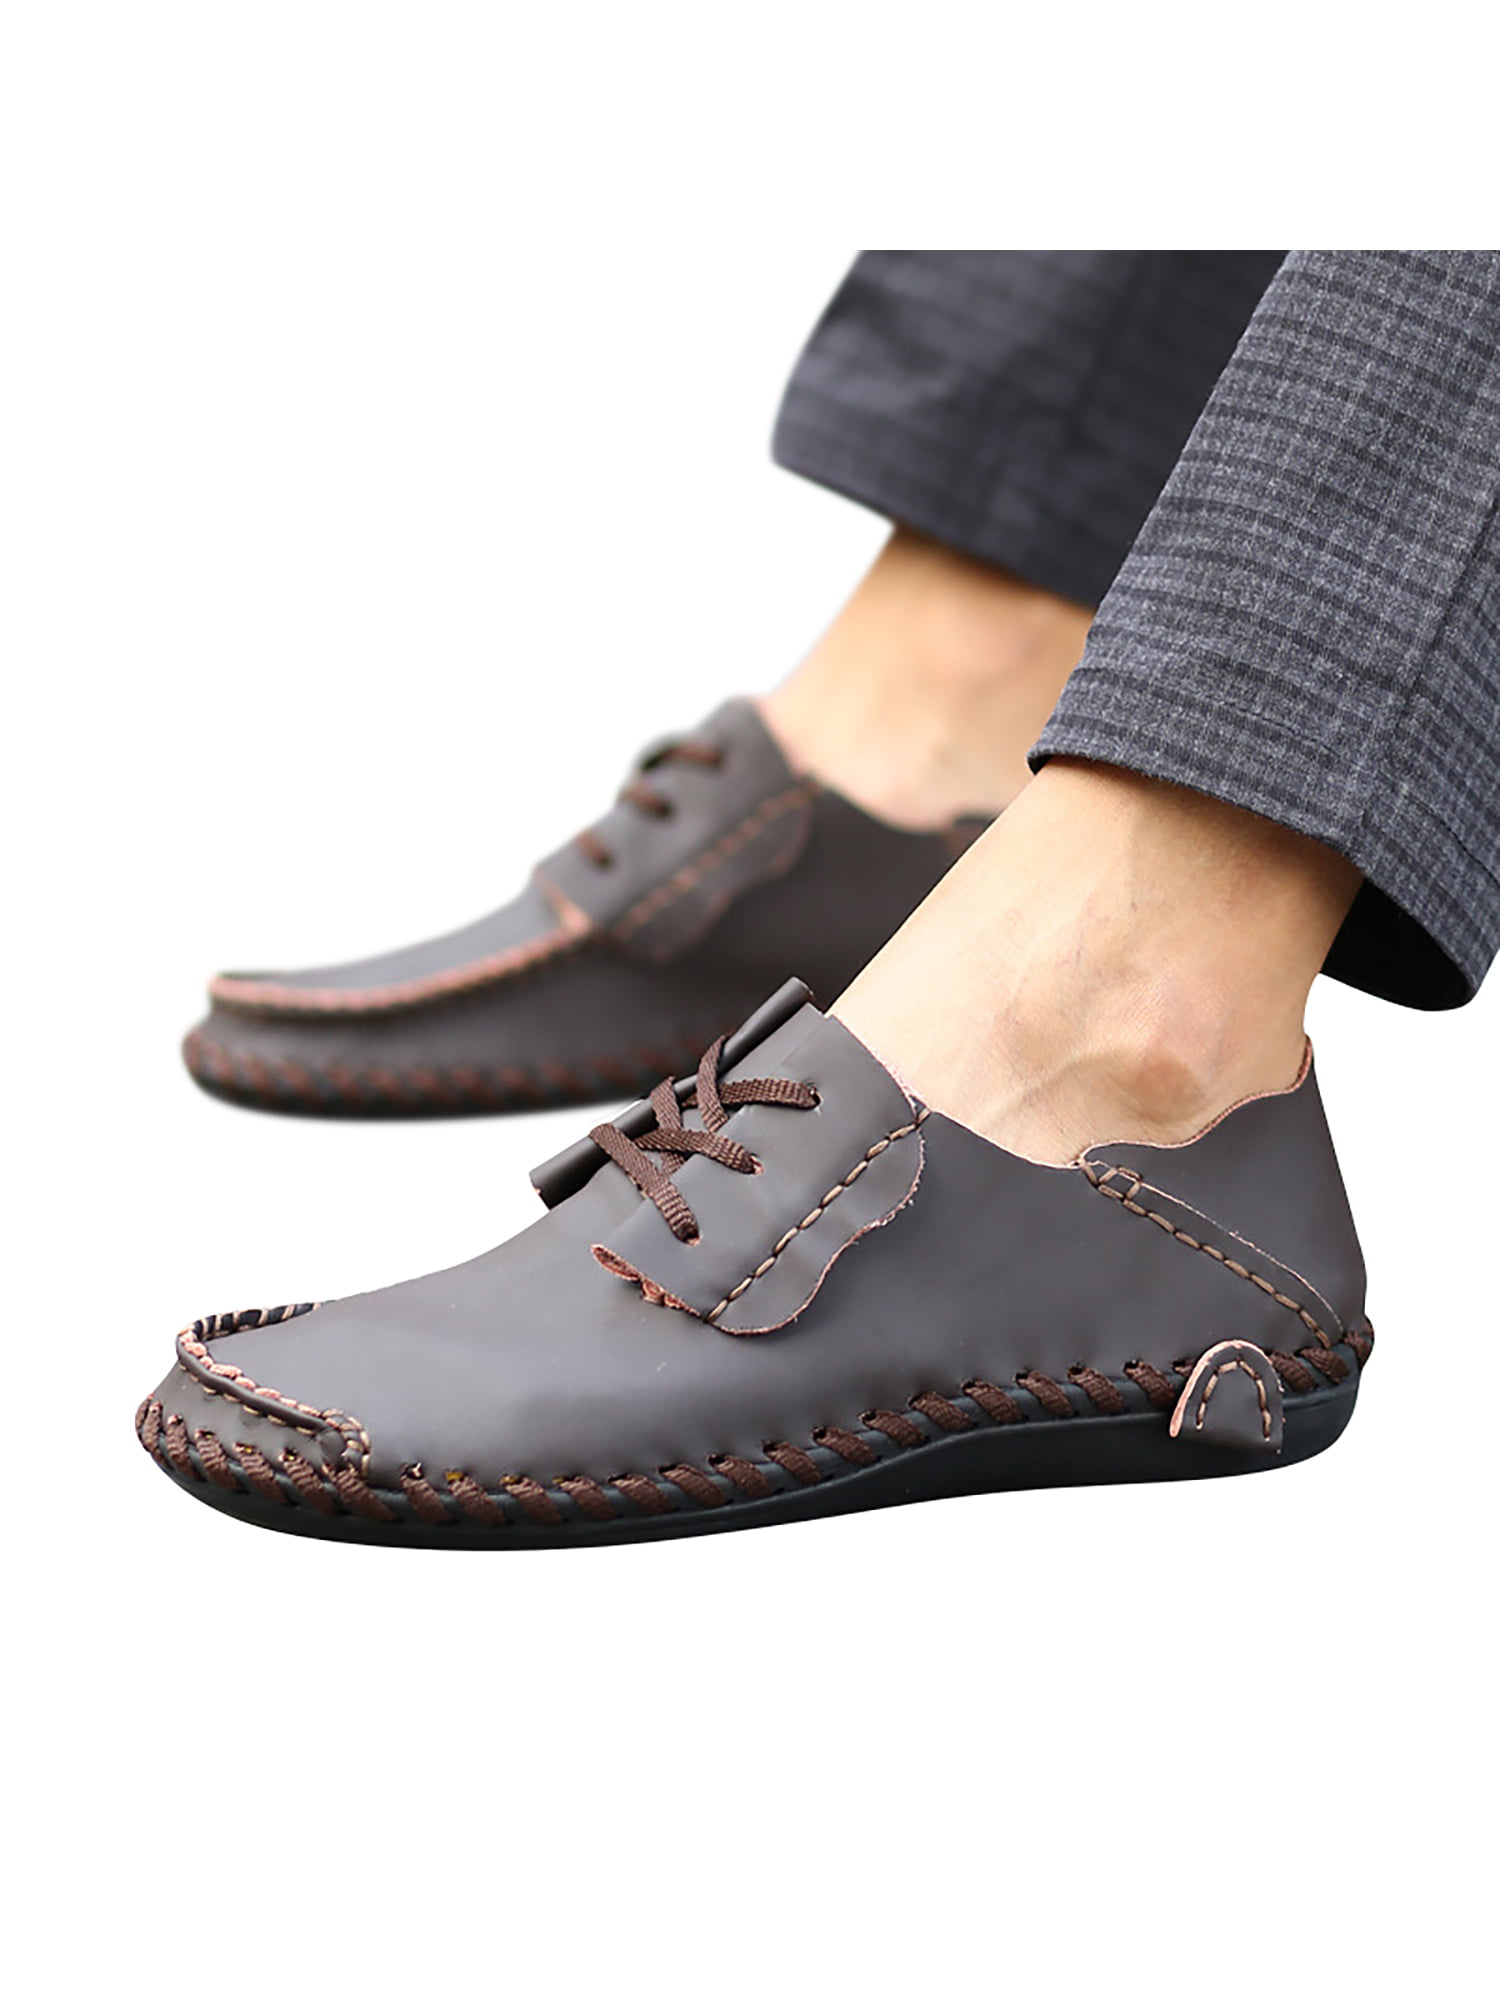 Mens Casual Round Toe Loafers Oxfords Comfy Breathable Mesh Flats Dress Shoes